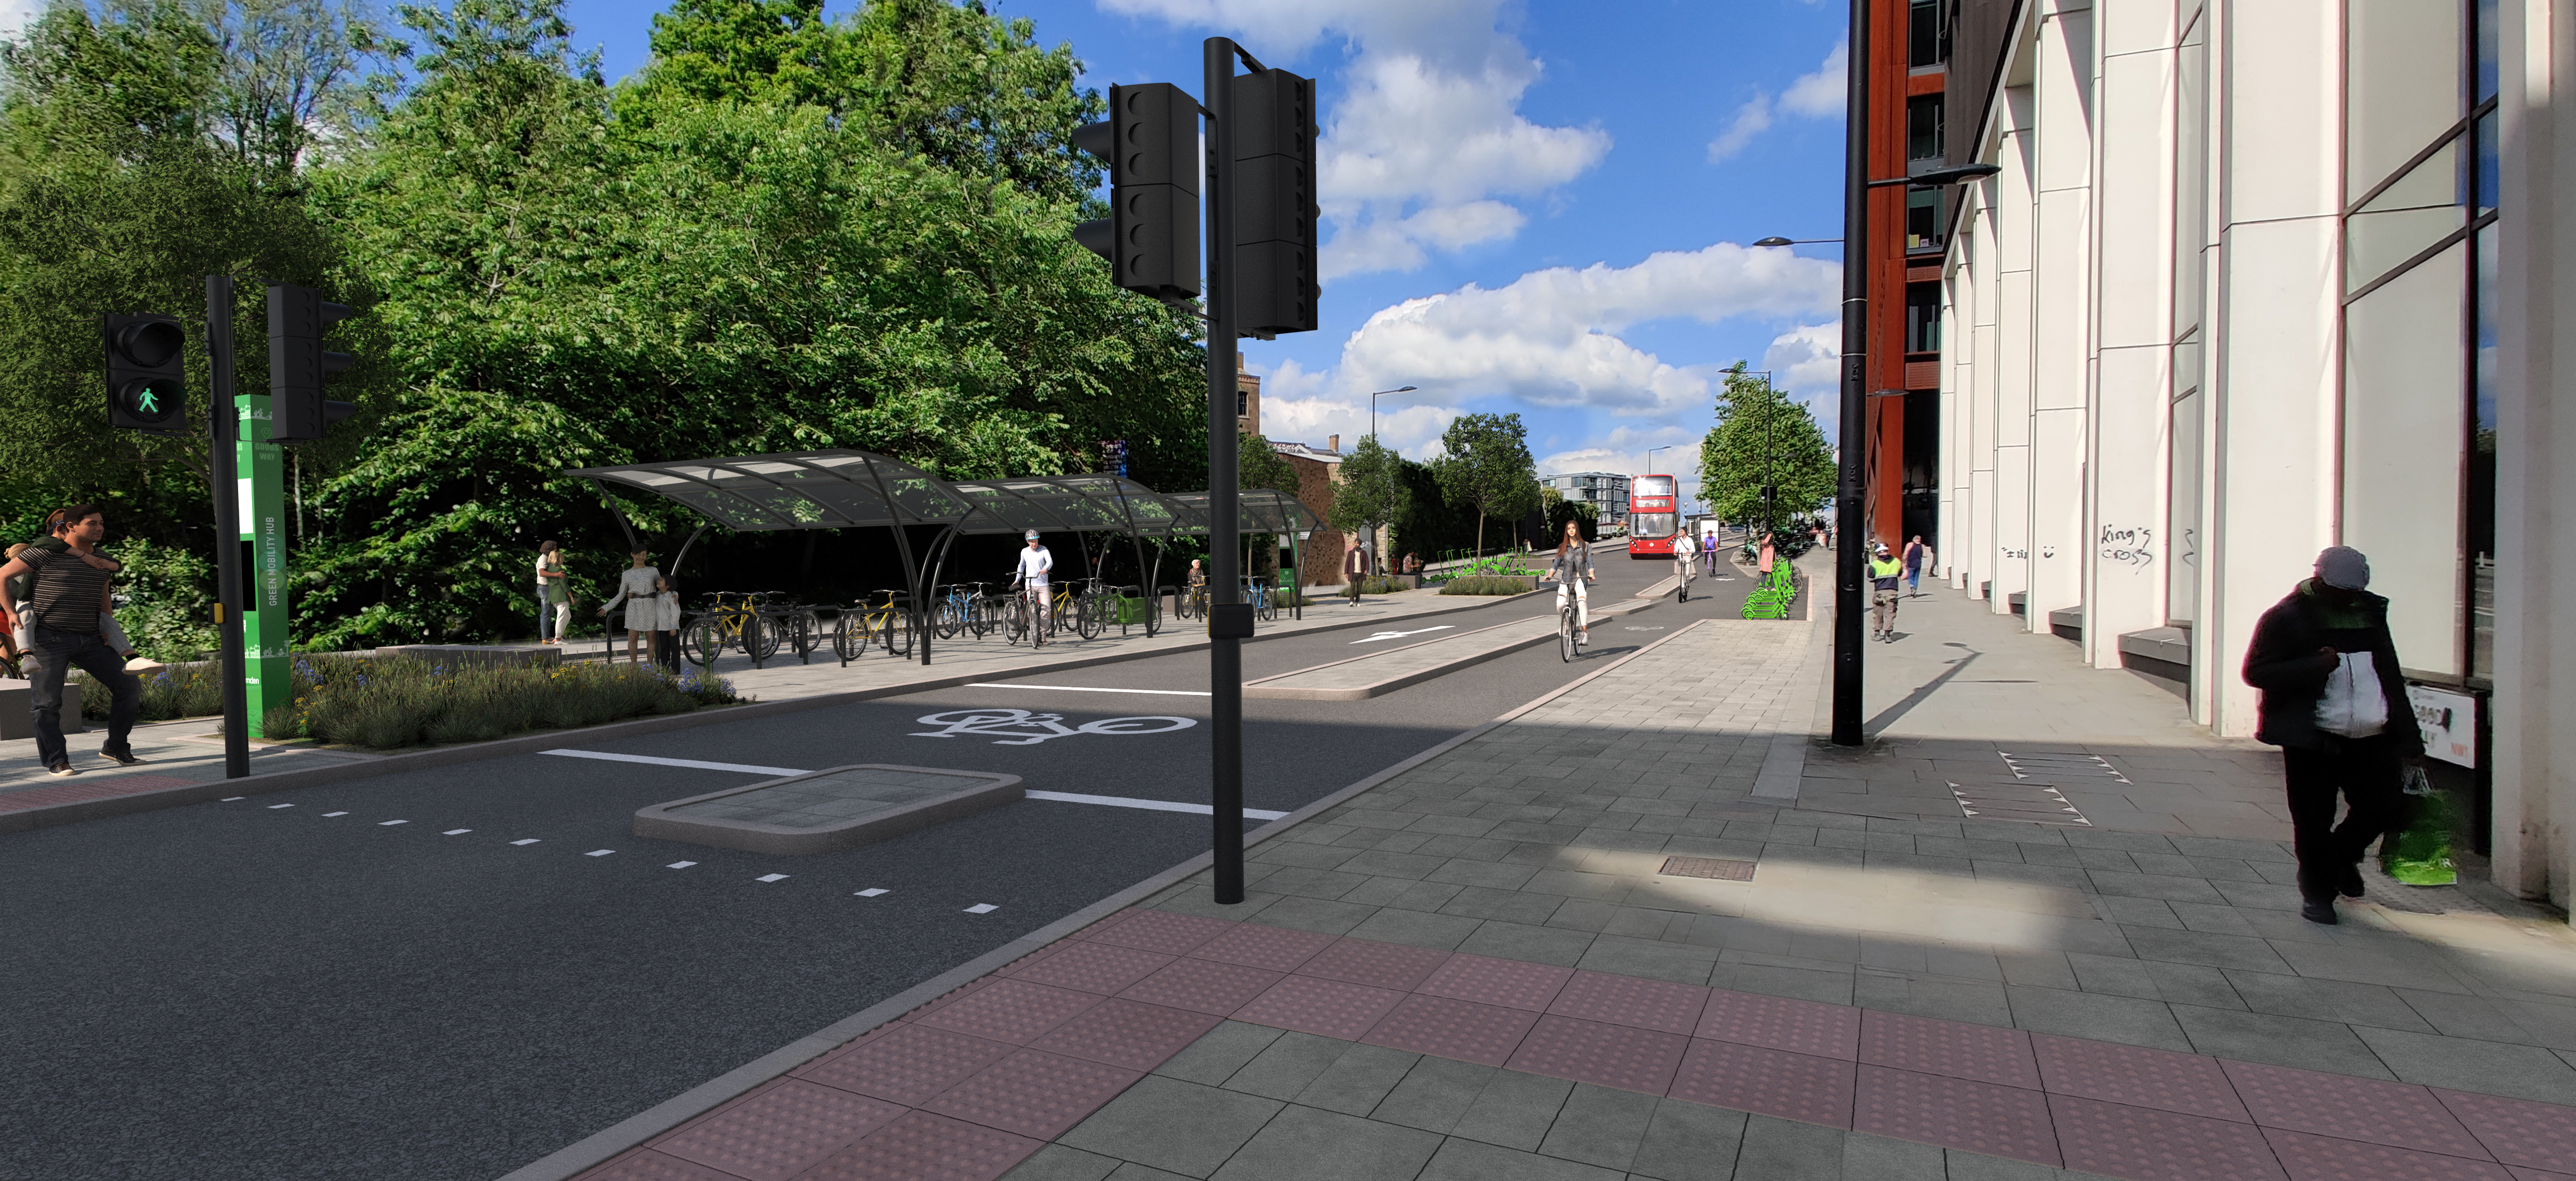 Visualisation of proposed changes on Goods Way, including kerb-separated cycle tracks, a new mobility hub with sheltered cycle parking, a cycle tool, expanded e-bike and scooter parking, as well as a new bus stop.